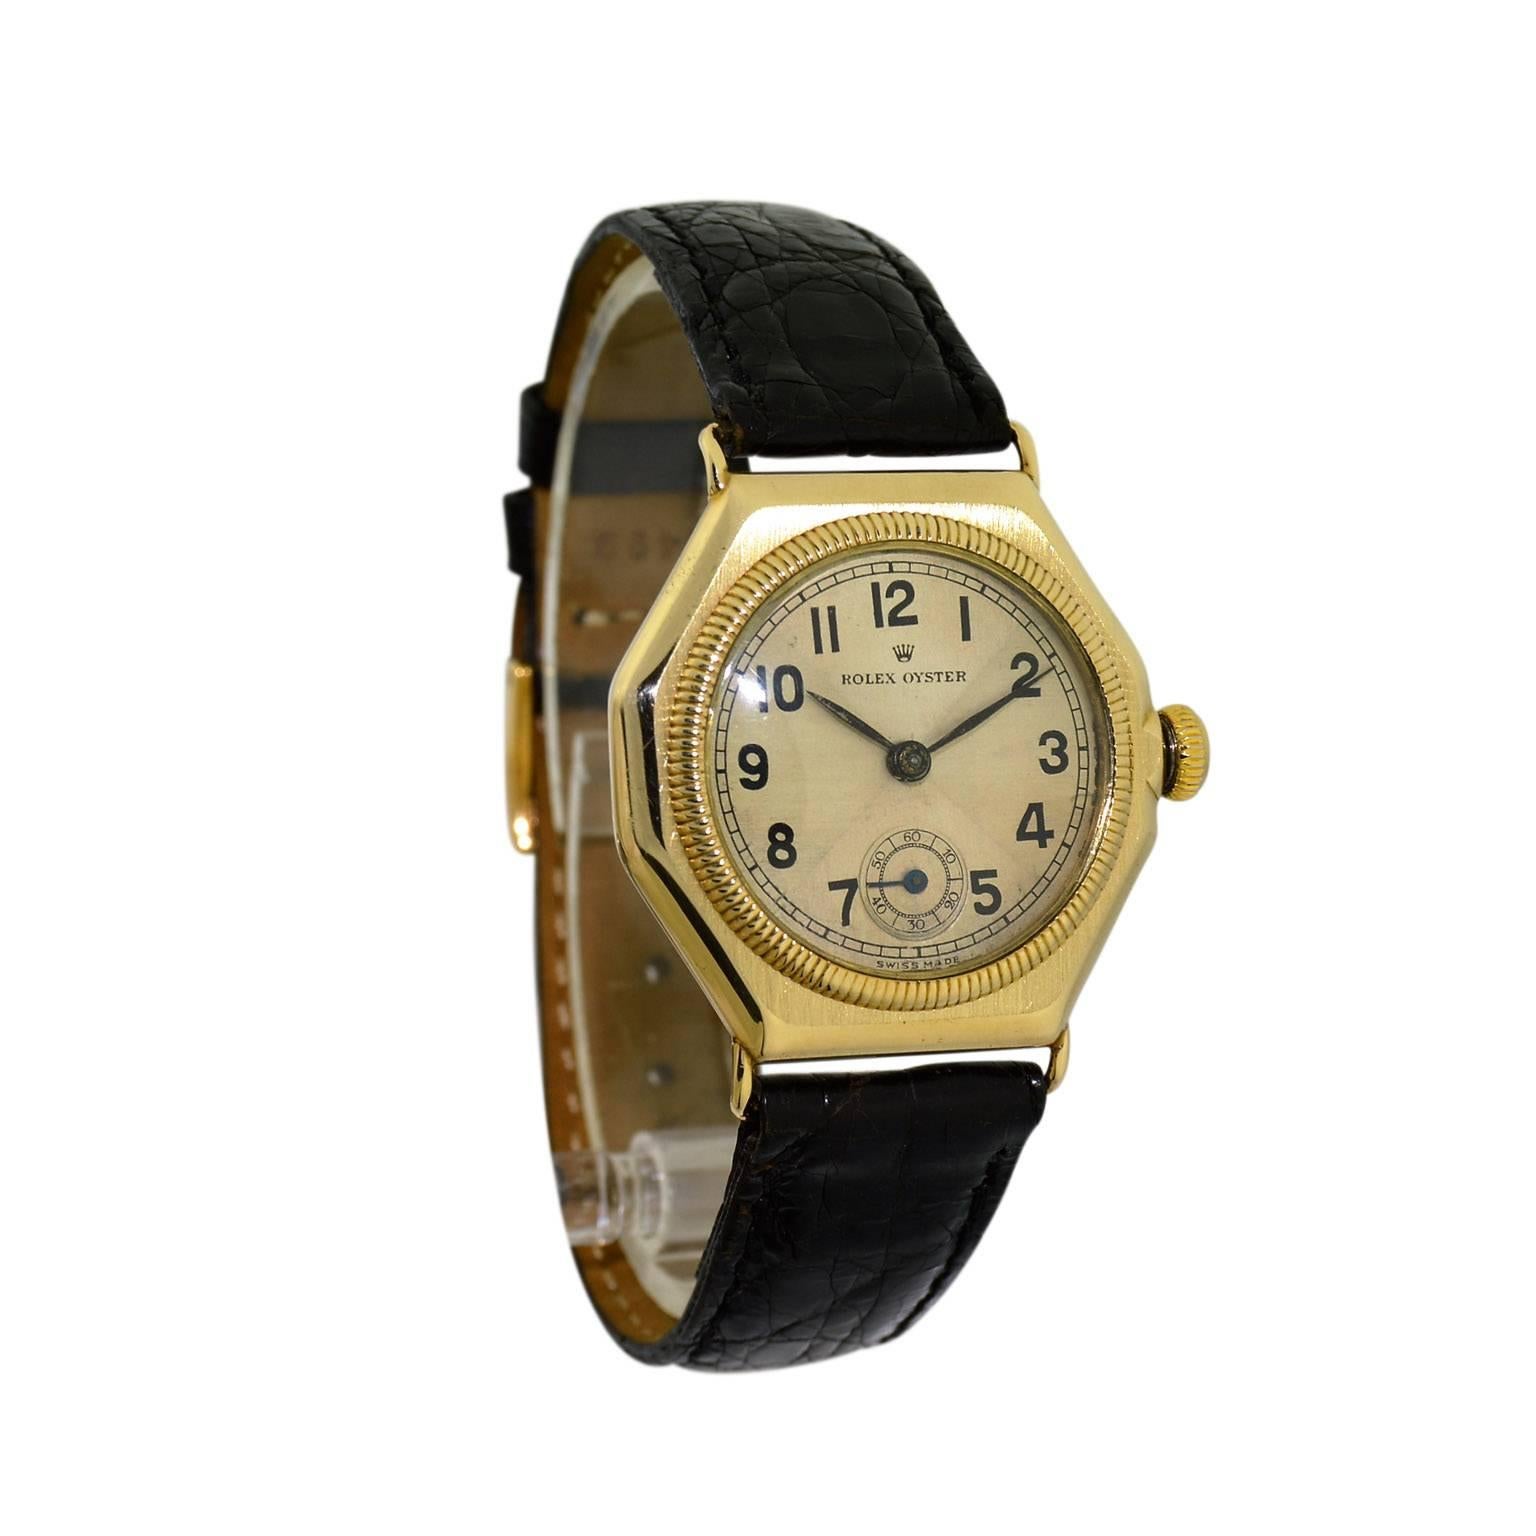 FACTORY / HOUSE: Rolex Watch Company
STYLE / REFERENCE: Octagon
METAL / MATERIAL: 9Ct. Yellow Gold English Market
DIMENSIONS: 37mm X 32mm
CIRCA: 1936 / 1937
MOVEMENT / CALIBER:  Manual Winding /  15 Jewels 
DIAL / HANDS: Original Rare, Quartered